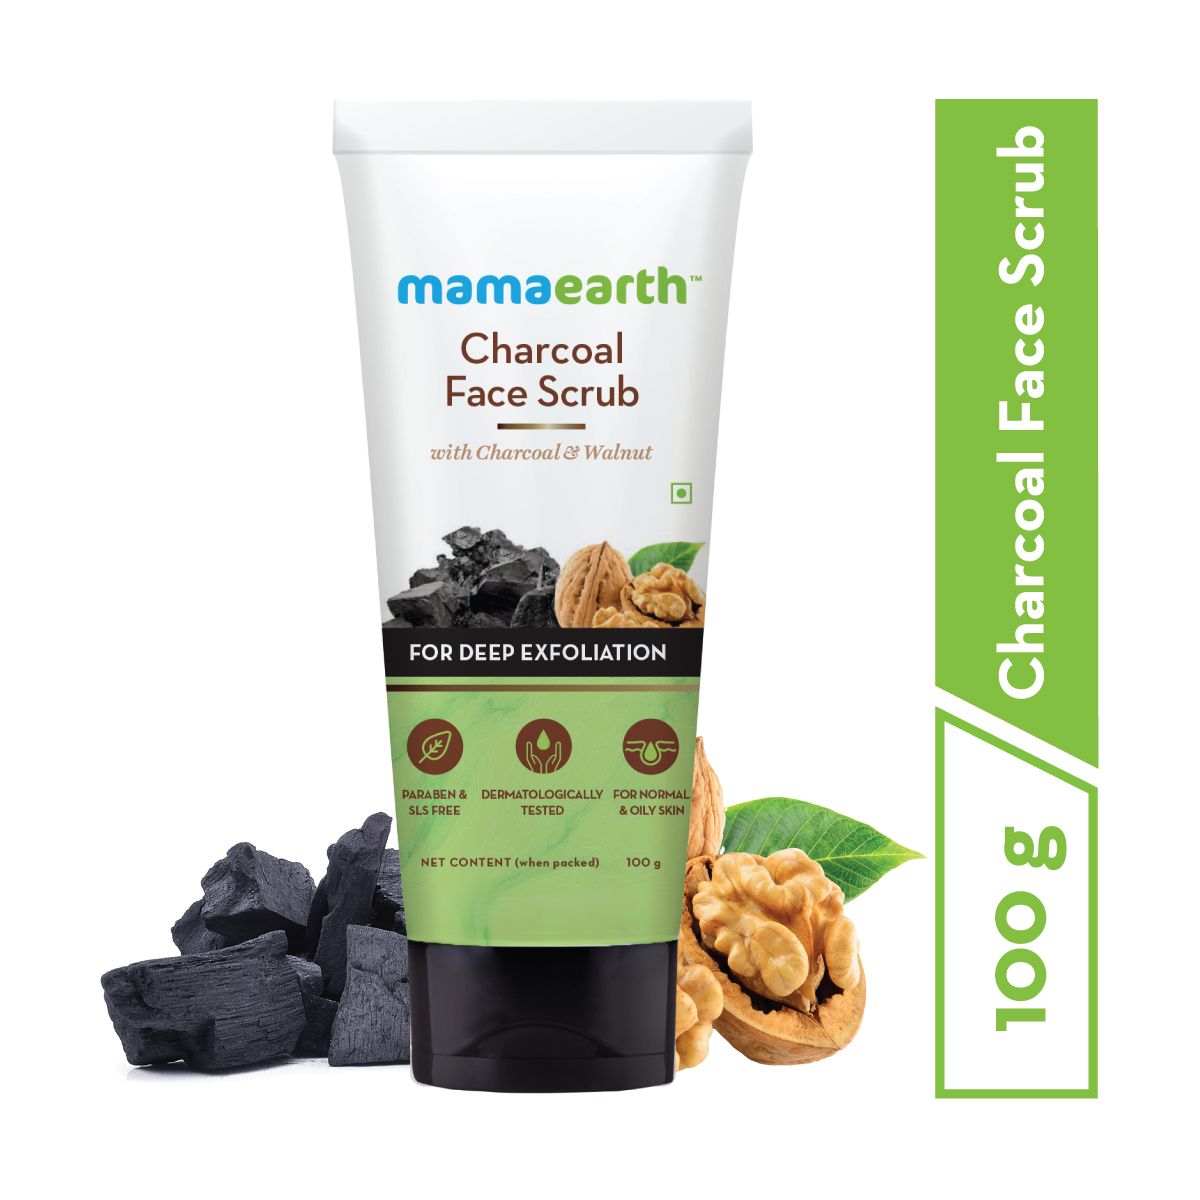 Mamaearth Charcoal Face Scrub Better Than Others Available In The Market